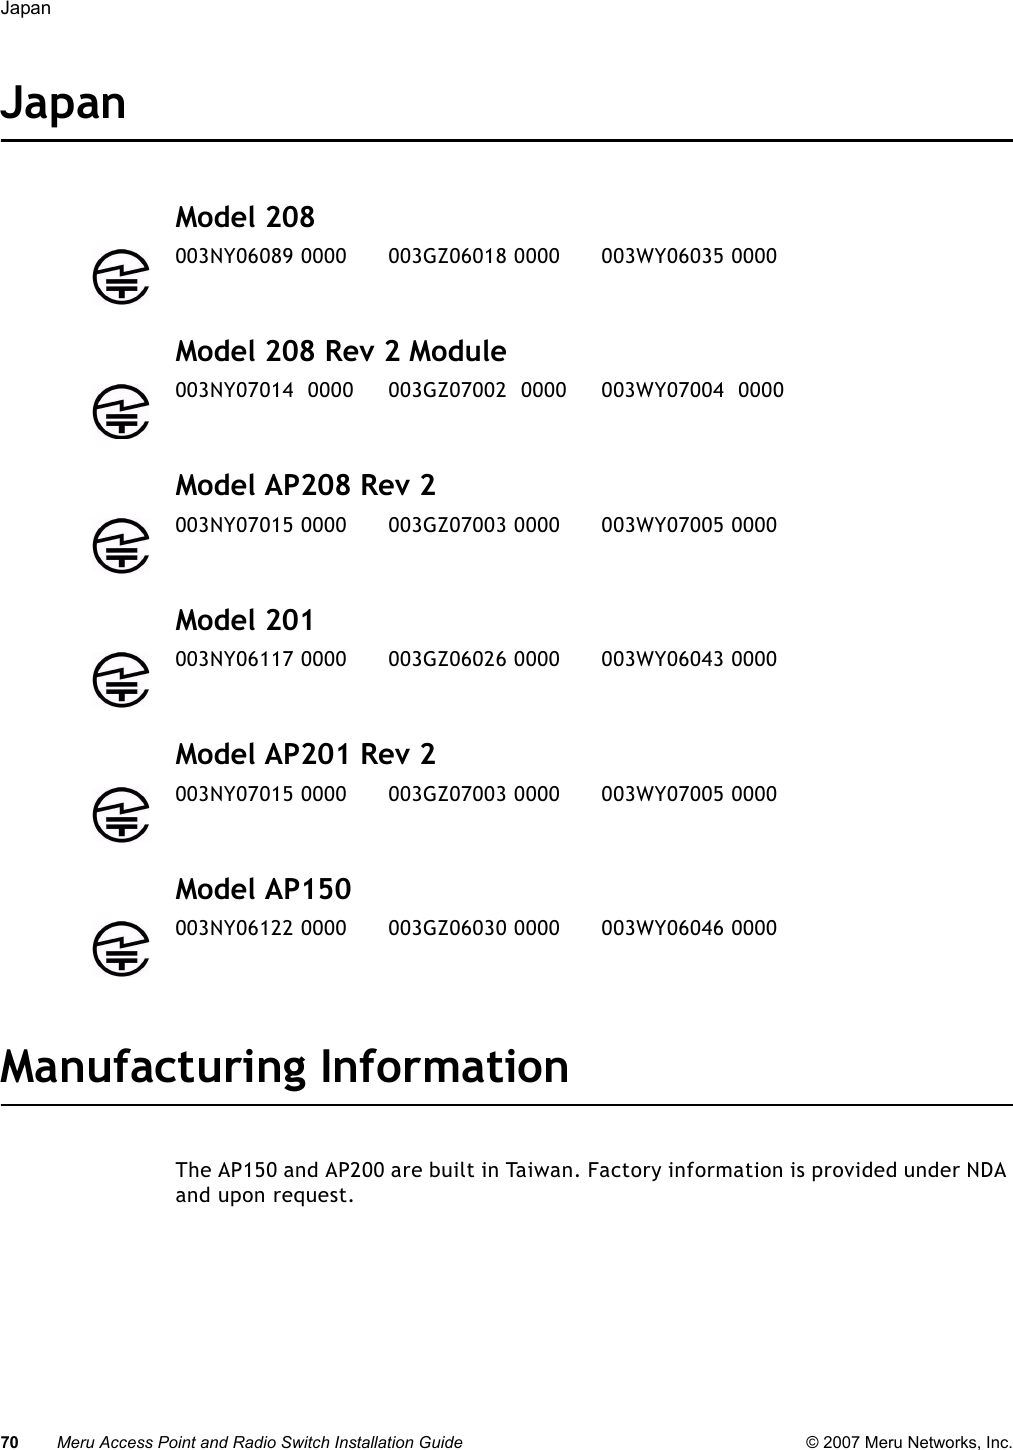 70 Meru Access Point and Radio Switch Installation Guide © 2007 Meru Networks, Inc.Japan JapanModel 208Model 208 Rev 2 ModuleModel AP208 Rev 2Model 201Model AP201 Rev 2Model AP150 Manufacturing InformationThe AP150 and AP200 are built in Taiwan. Factory information is provided under NDA and upon request.003NY06089 0000      003GZ06018 0000      003WY06035 0000003NY07014  0000     003GZ07002  0000     003WY07004  0000003NY07015 0000      003GZ07003 0000      003WY07005 0000003NY06117 0000      003GZ06026 0000      003WY06043 0000003NY07015 0000      003GZ07003 0000      003WY07005 0000003NY06122 0000      003GZ06030 0000      003WY06046 0000